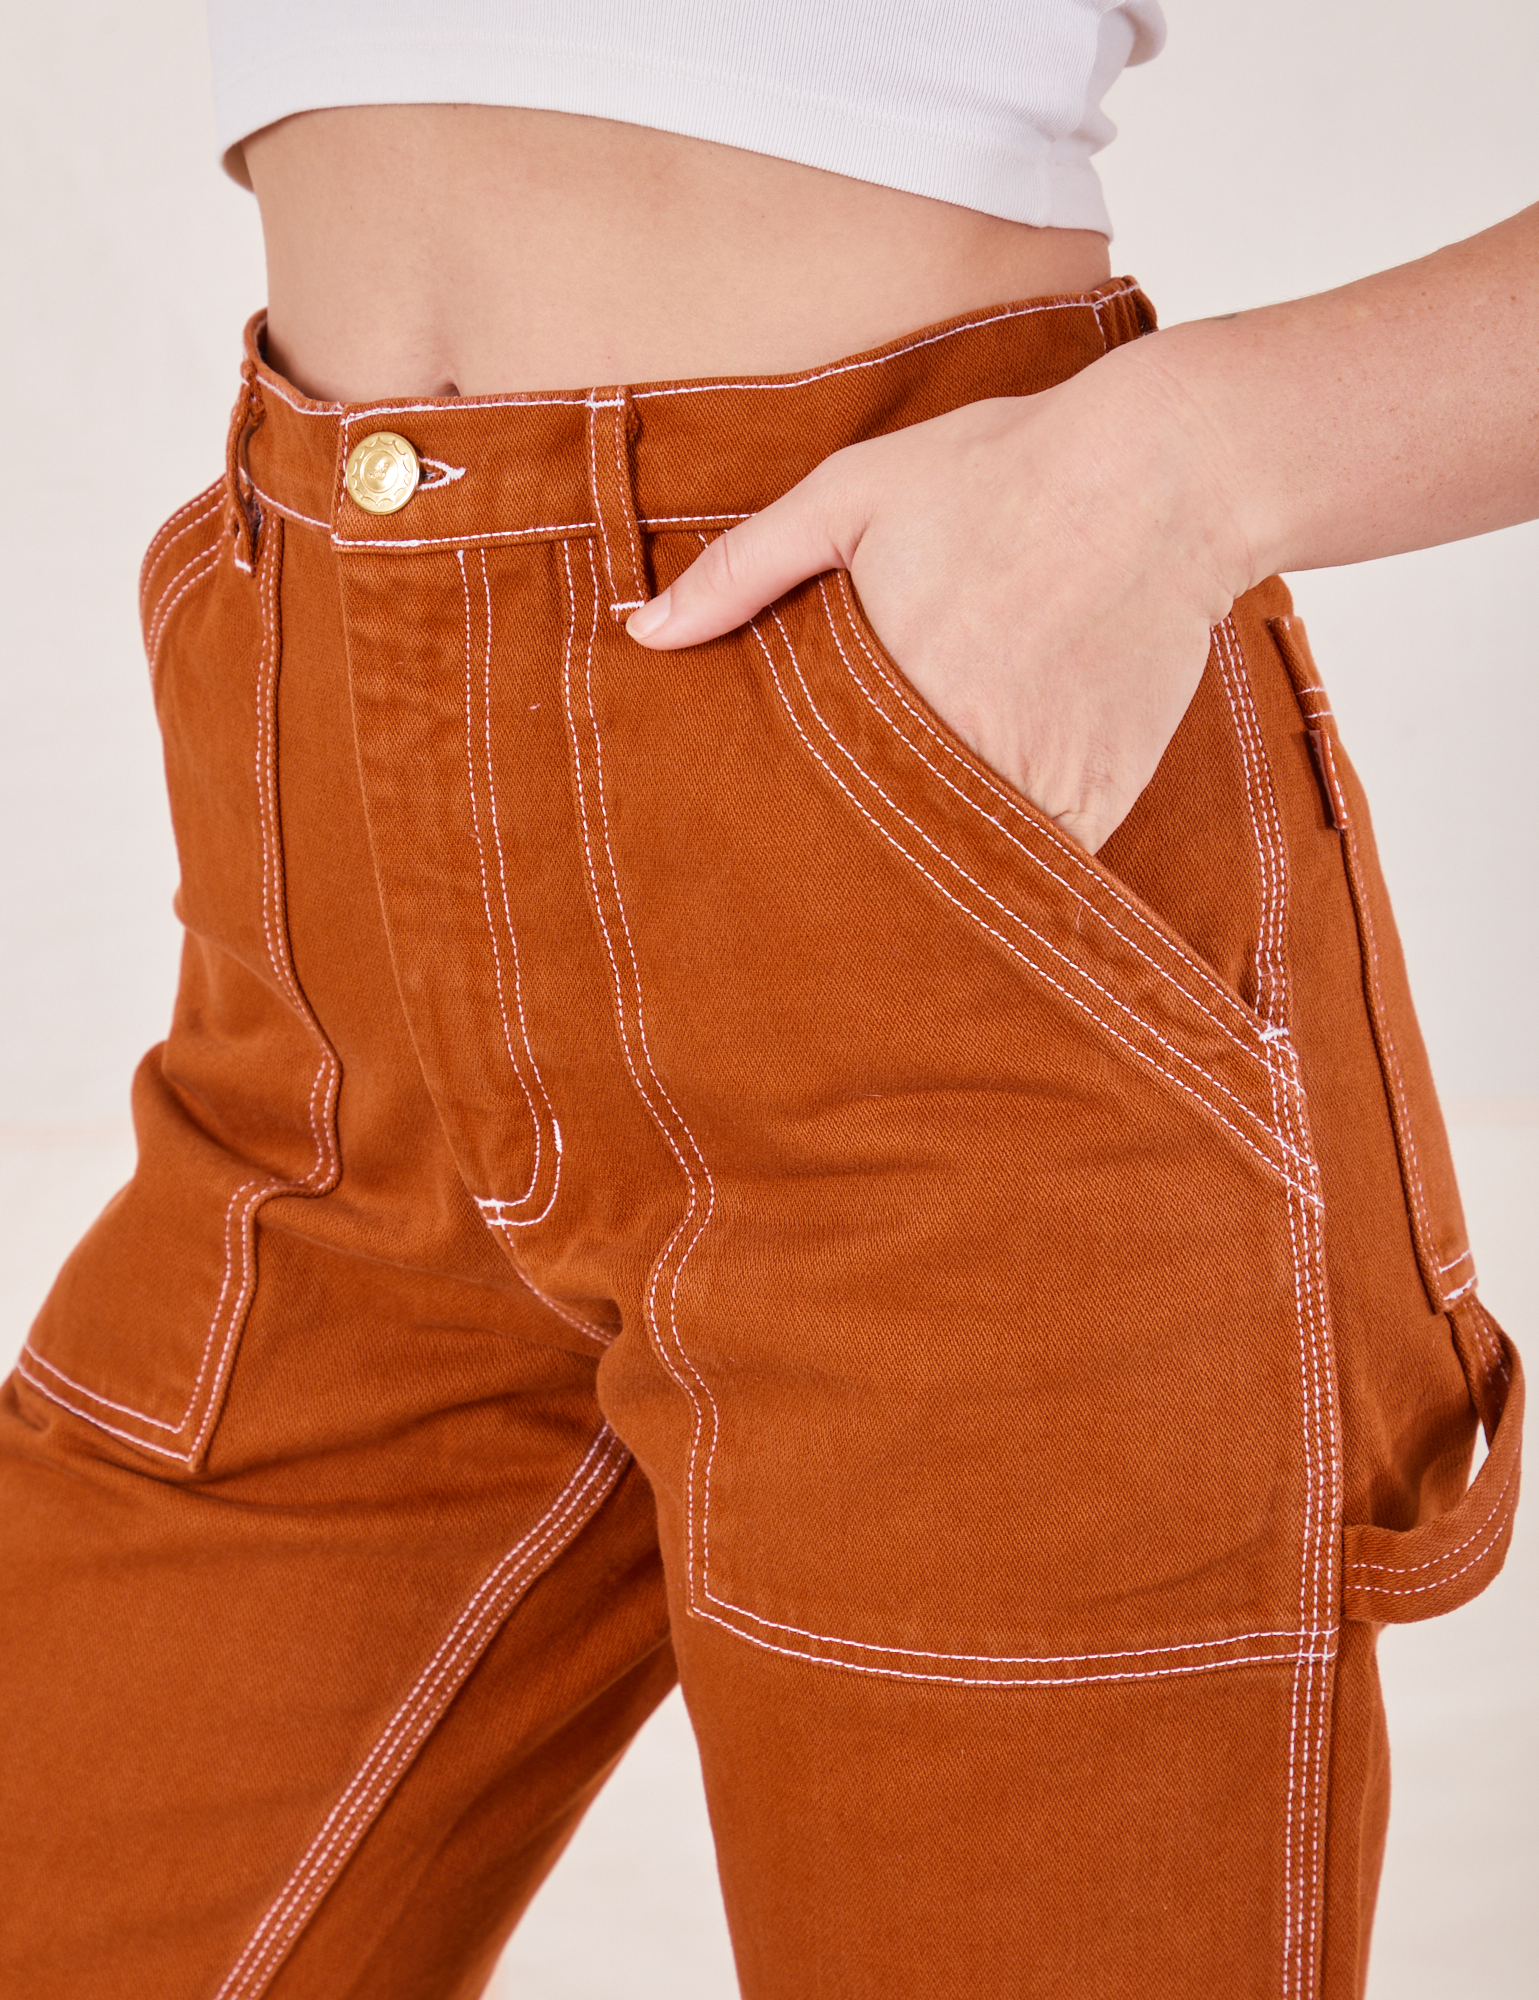 Front pocket close up of Carpenter Jeans in Burnt Terracotta. Alex has her hand in the pocket.